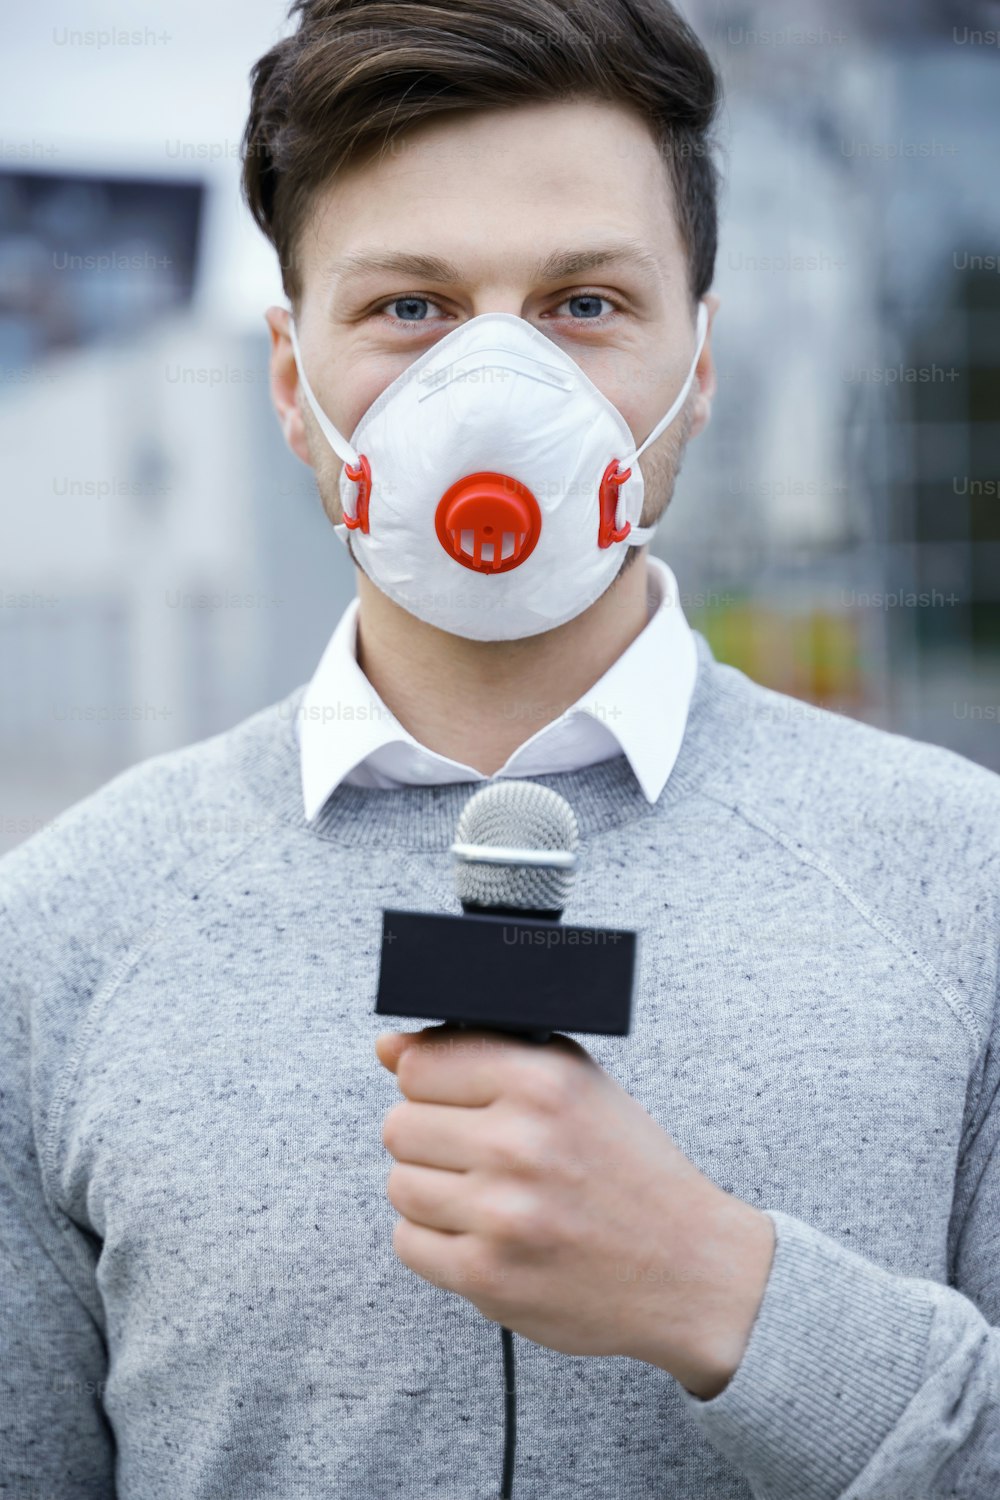 News reporter wearing a prevention mask and speaking into a microphone during broadcast